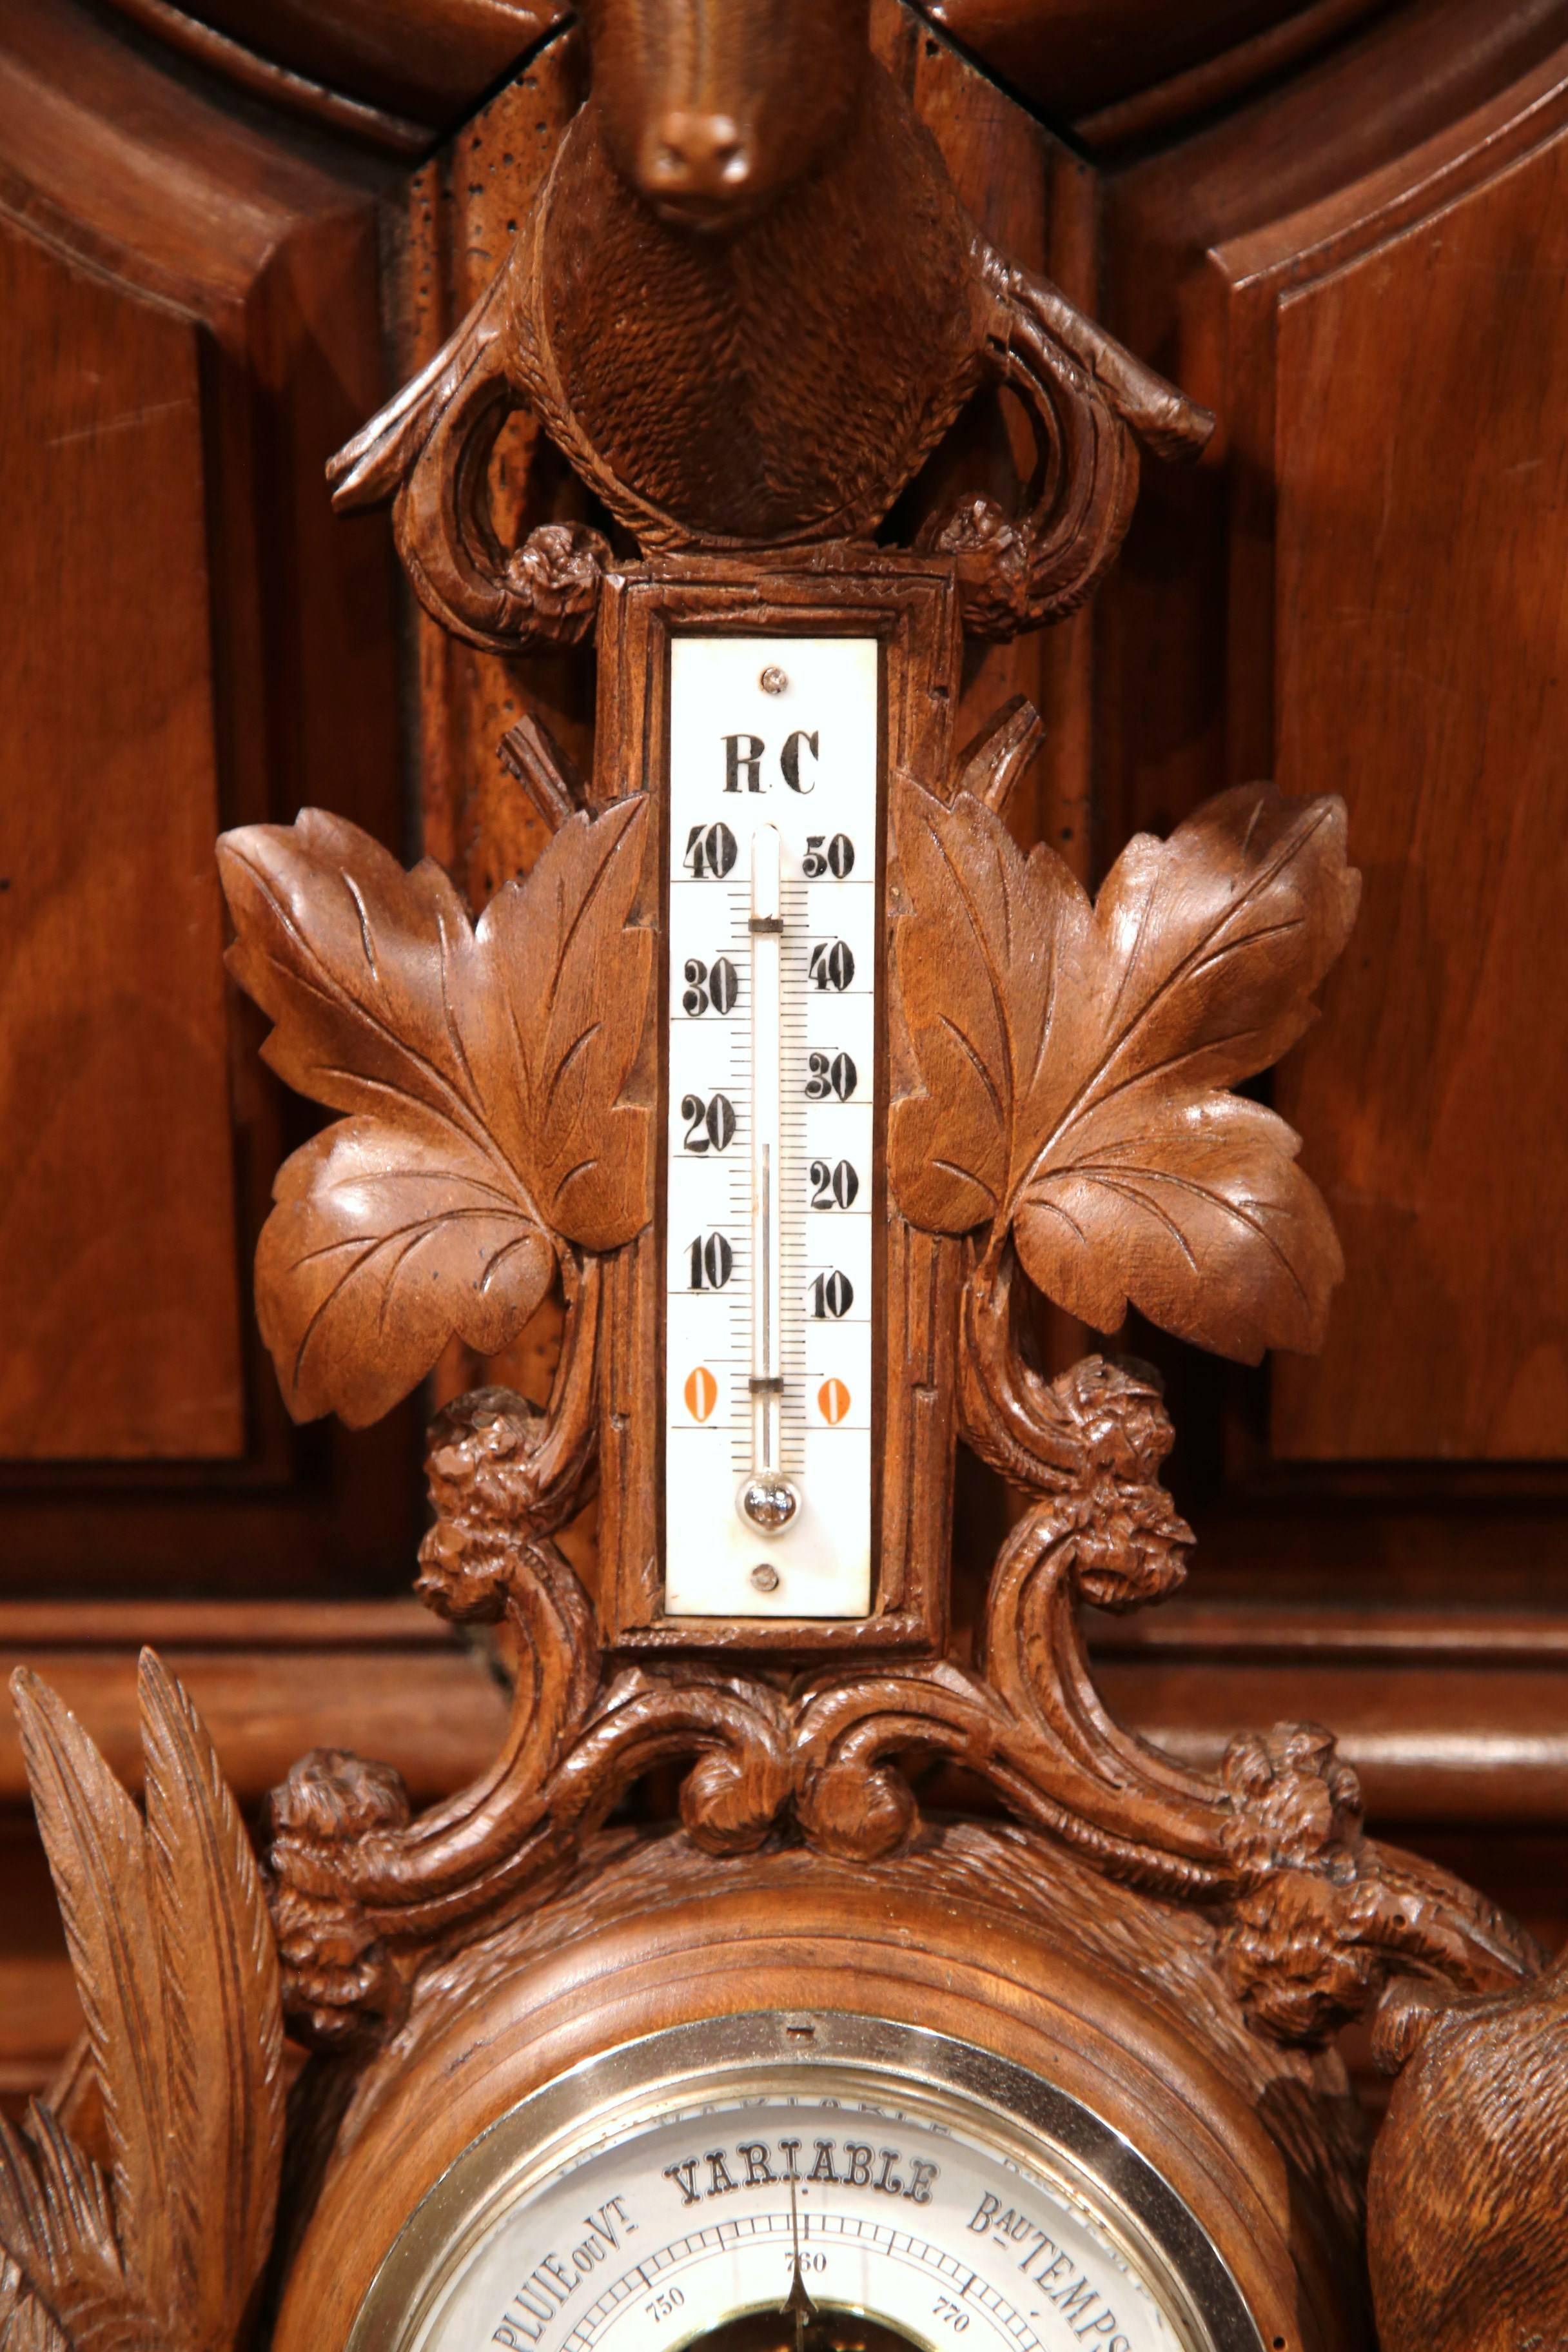 This elegant antique wall hanging barometer was crafted in France, circa 1880. The carved fruitwood weather and temperature reader features impressive, high-relief carvings, it has a carved deer with glass eyes at the top, flanked with bird and